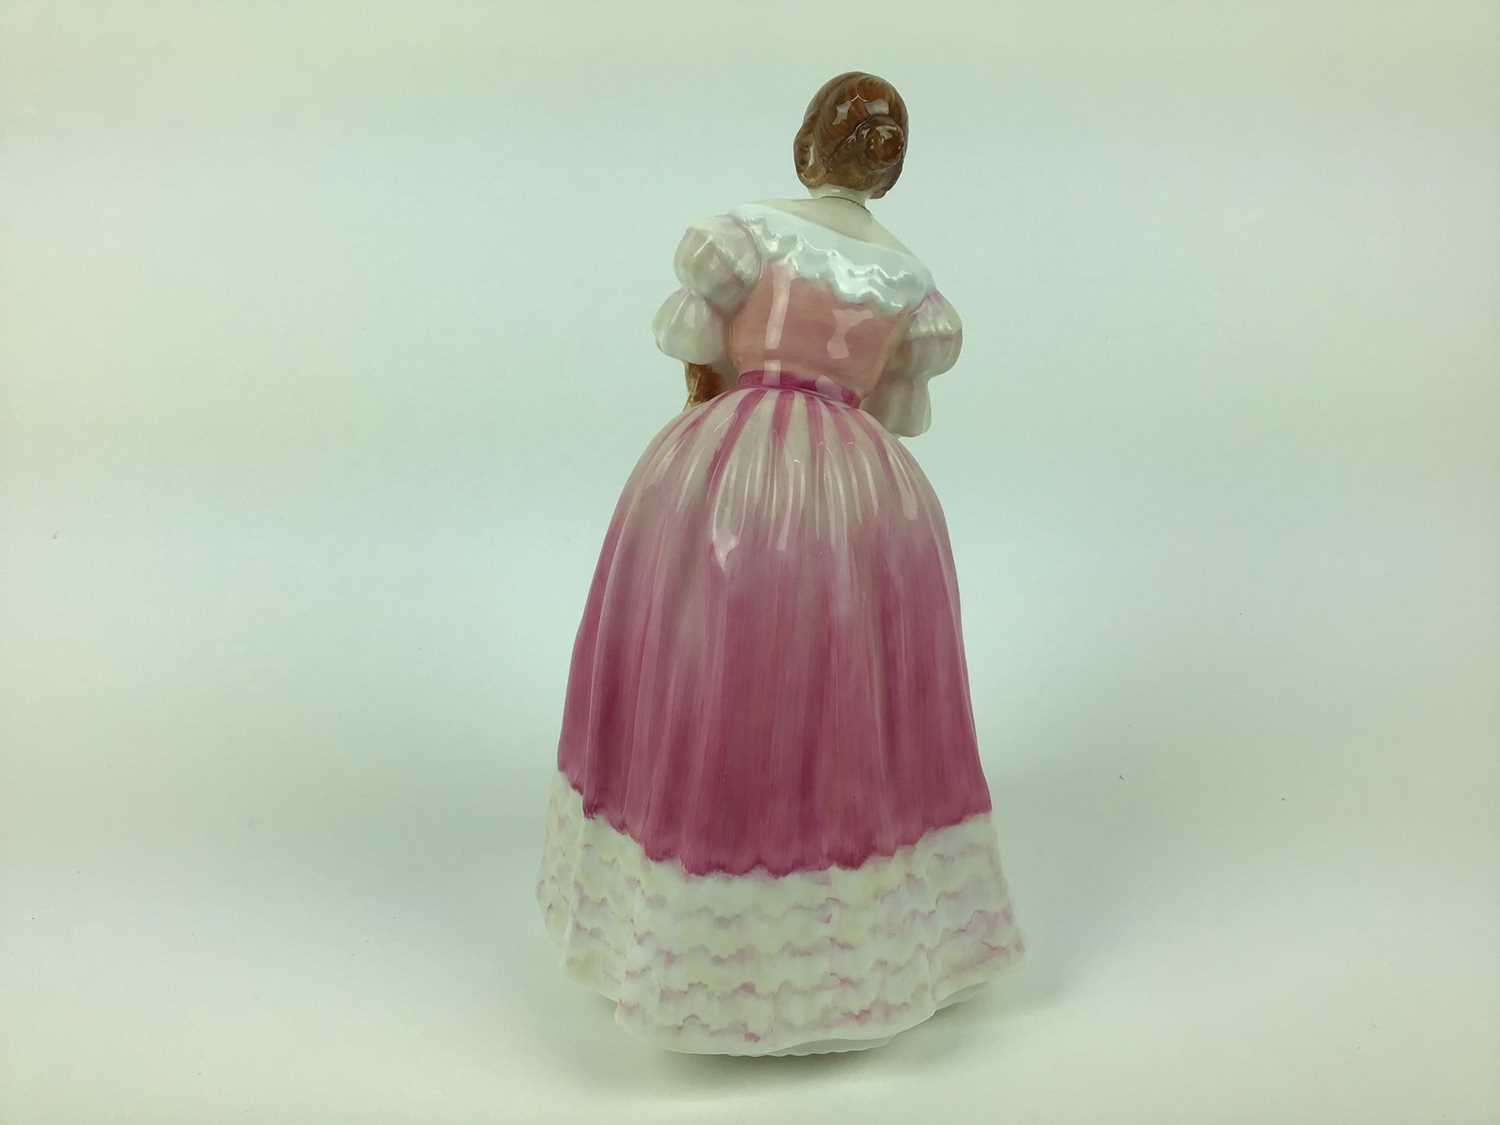 Royal Doulton limited edition figure - Queen Victoria HN3125, no 3578 of 5000, with certificate - Image 4 of 5